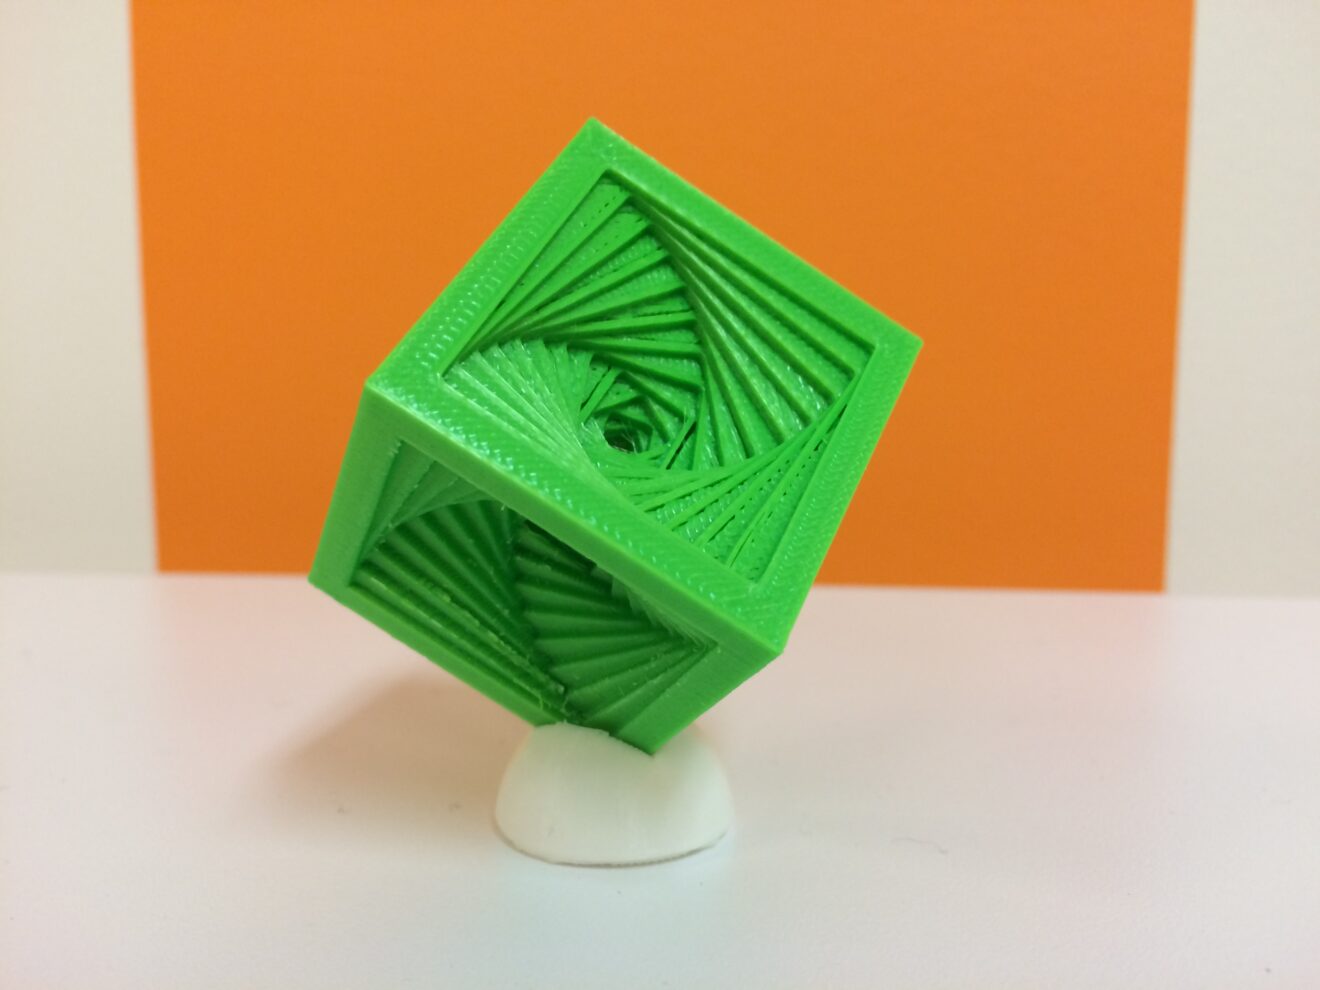 Image of a 3D printed cube